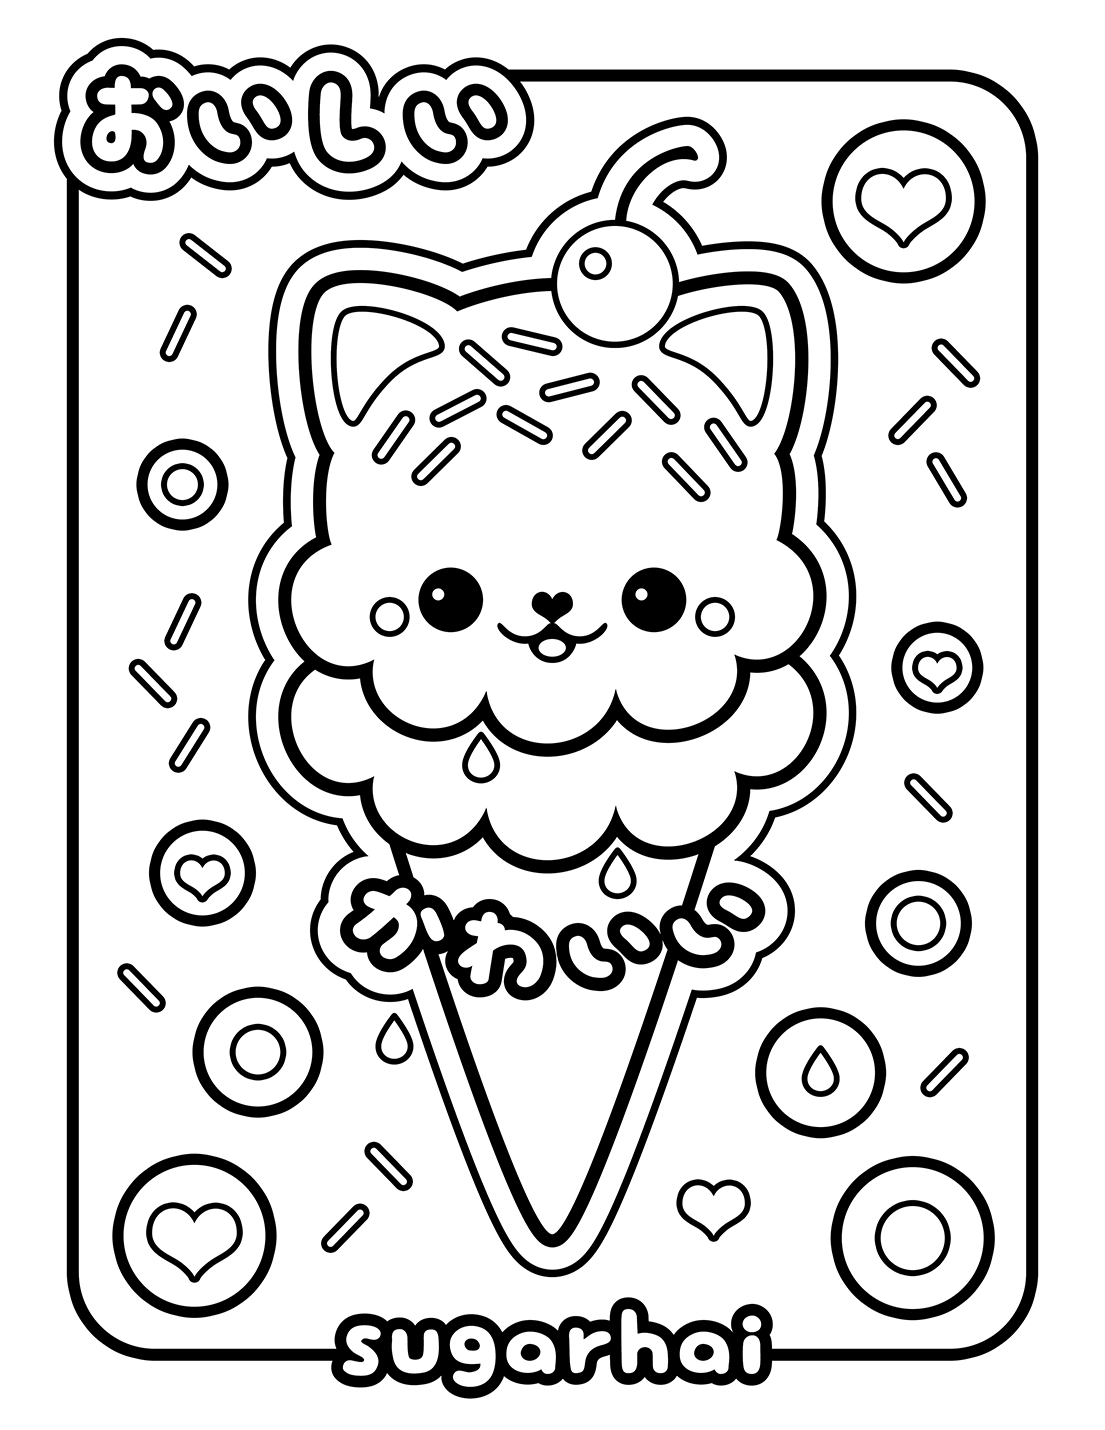 Trace And Color Cute Kawaii Ice Cream Coloring Page For Kids Stock  Illustration - Download Image Now - iStock